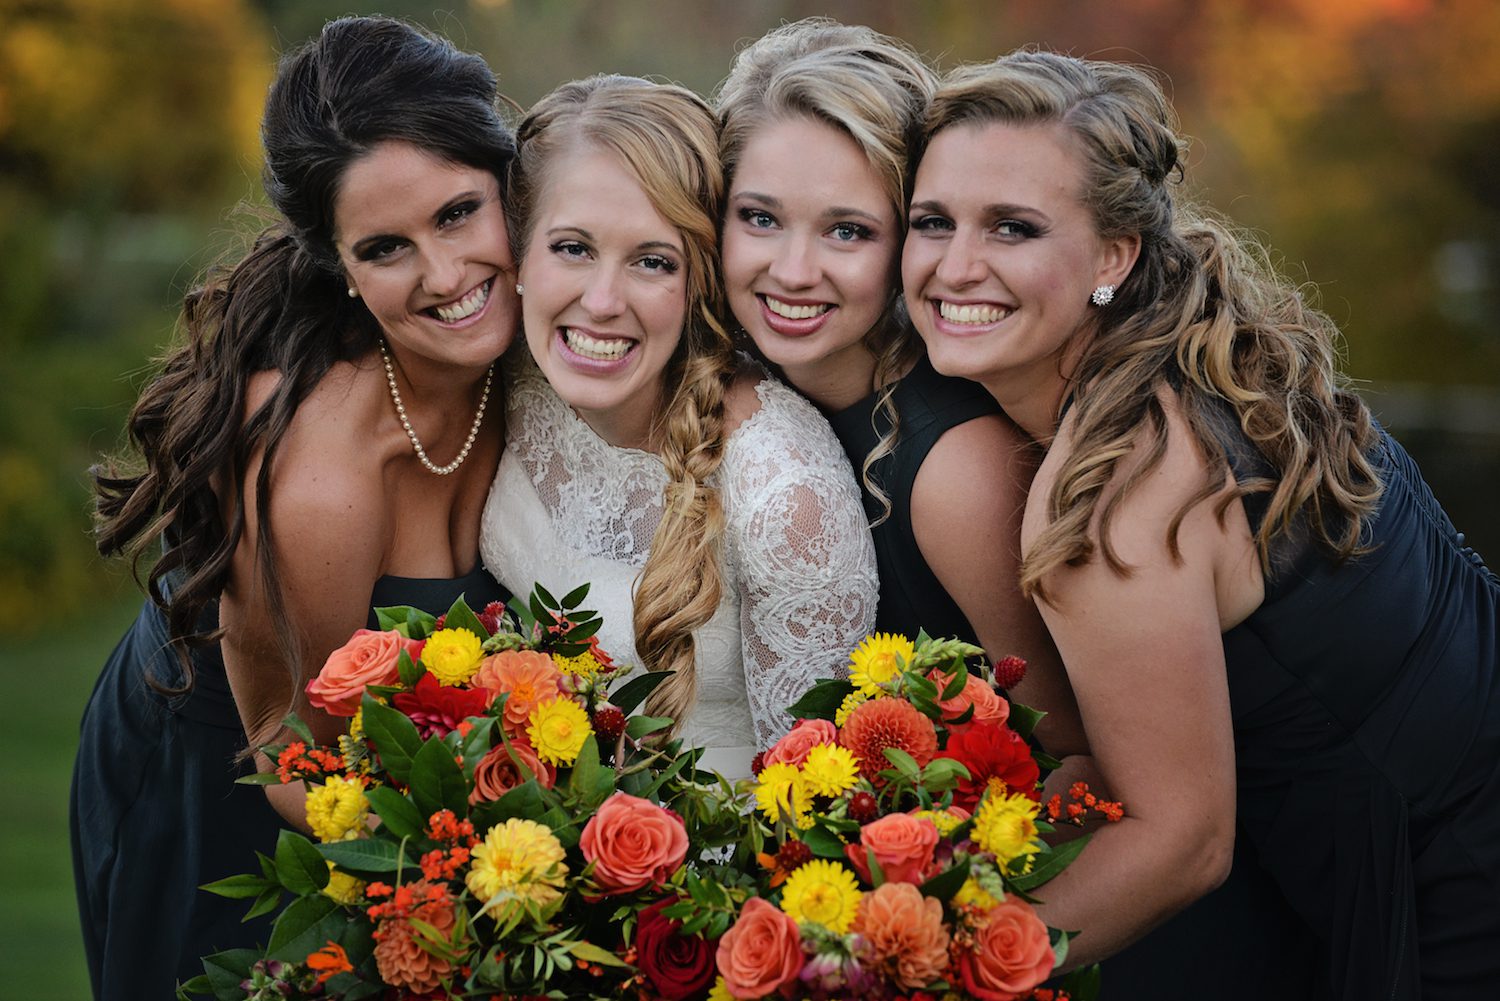 Fall-themed-orange-red-yellow-bridal-bouquets.JPG